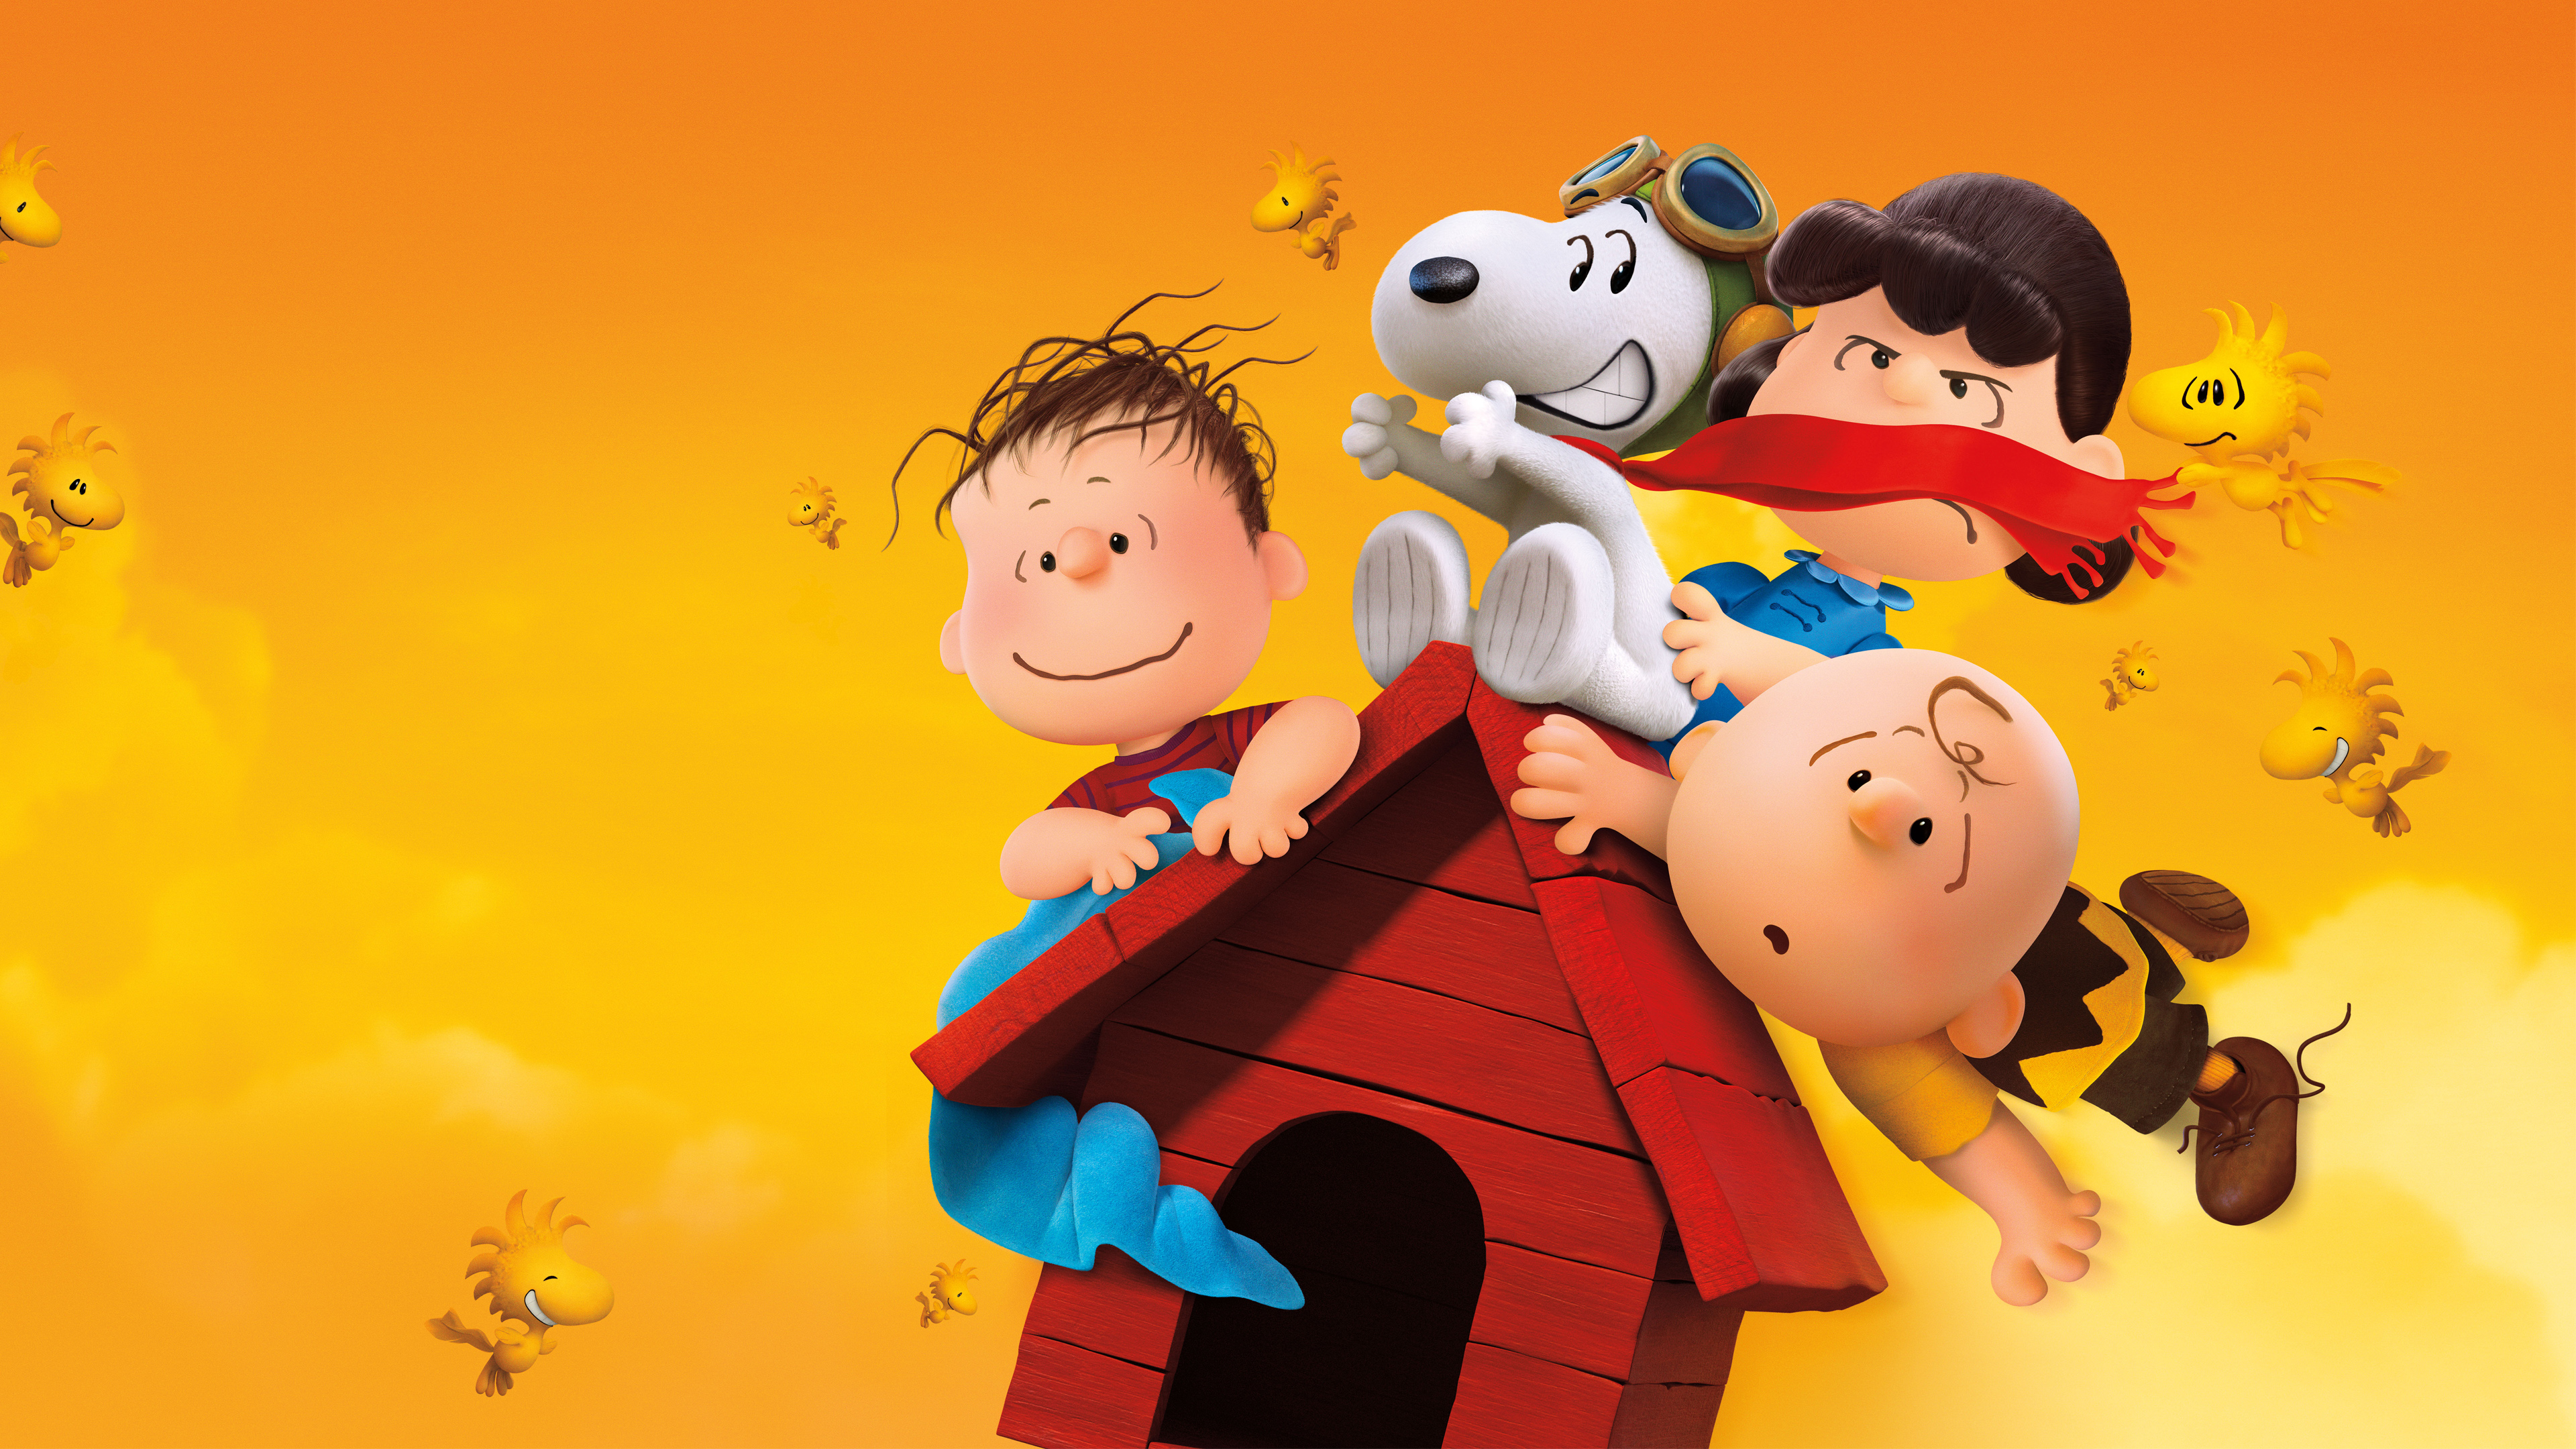 Snoopy Wallpaper - Snoopy Flying Ace The Peanuts Movie - HD Wallpaper 